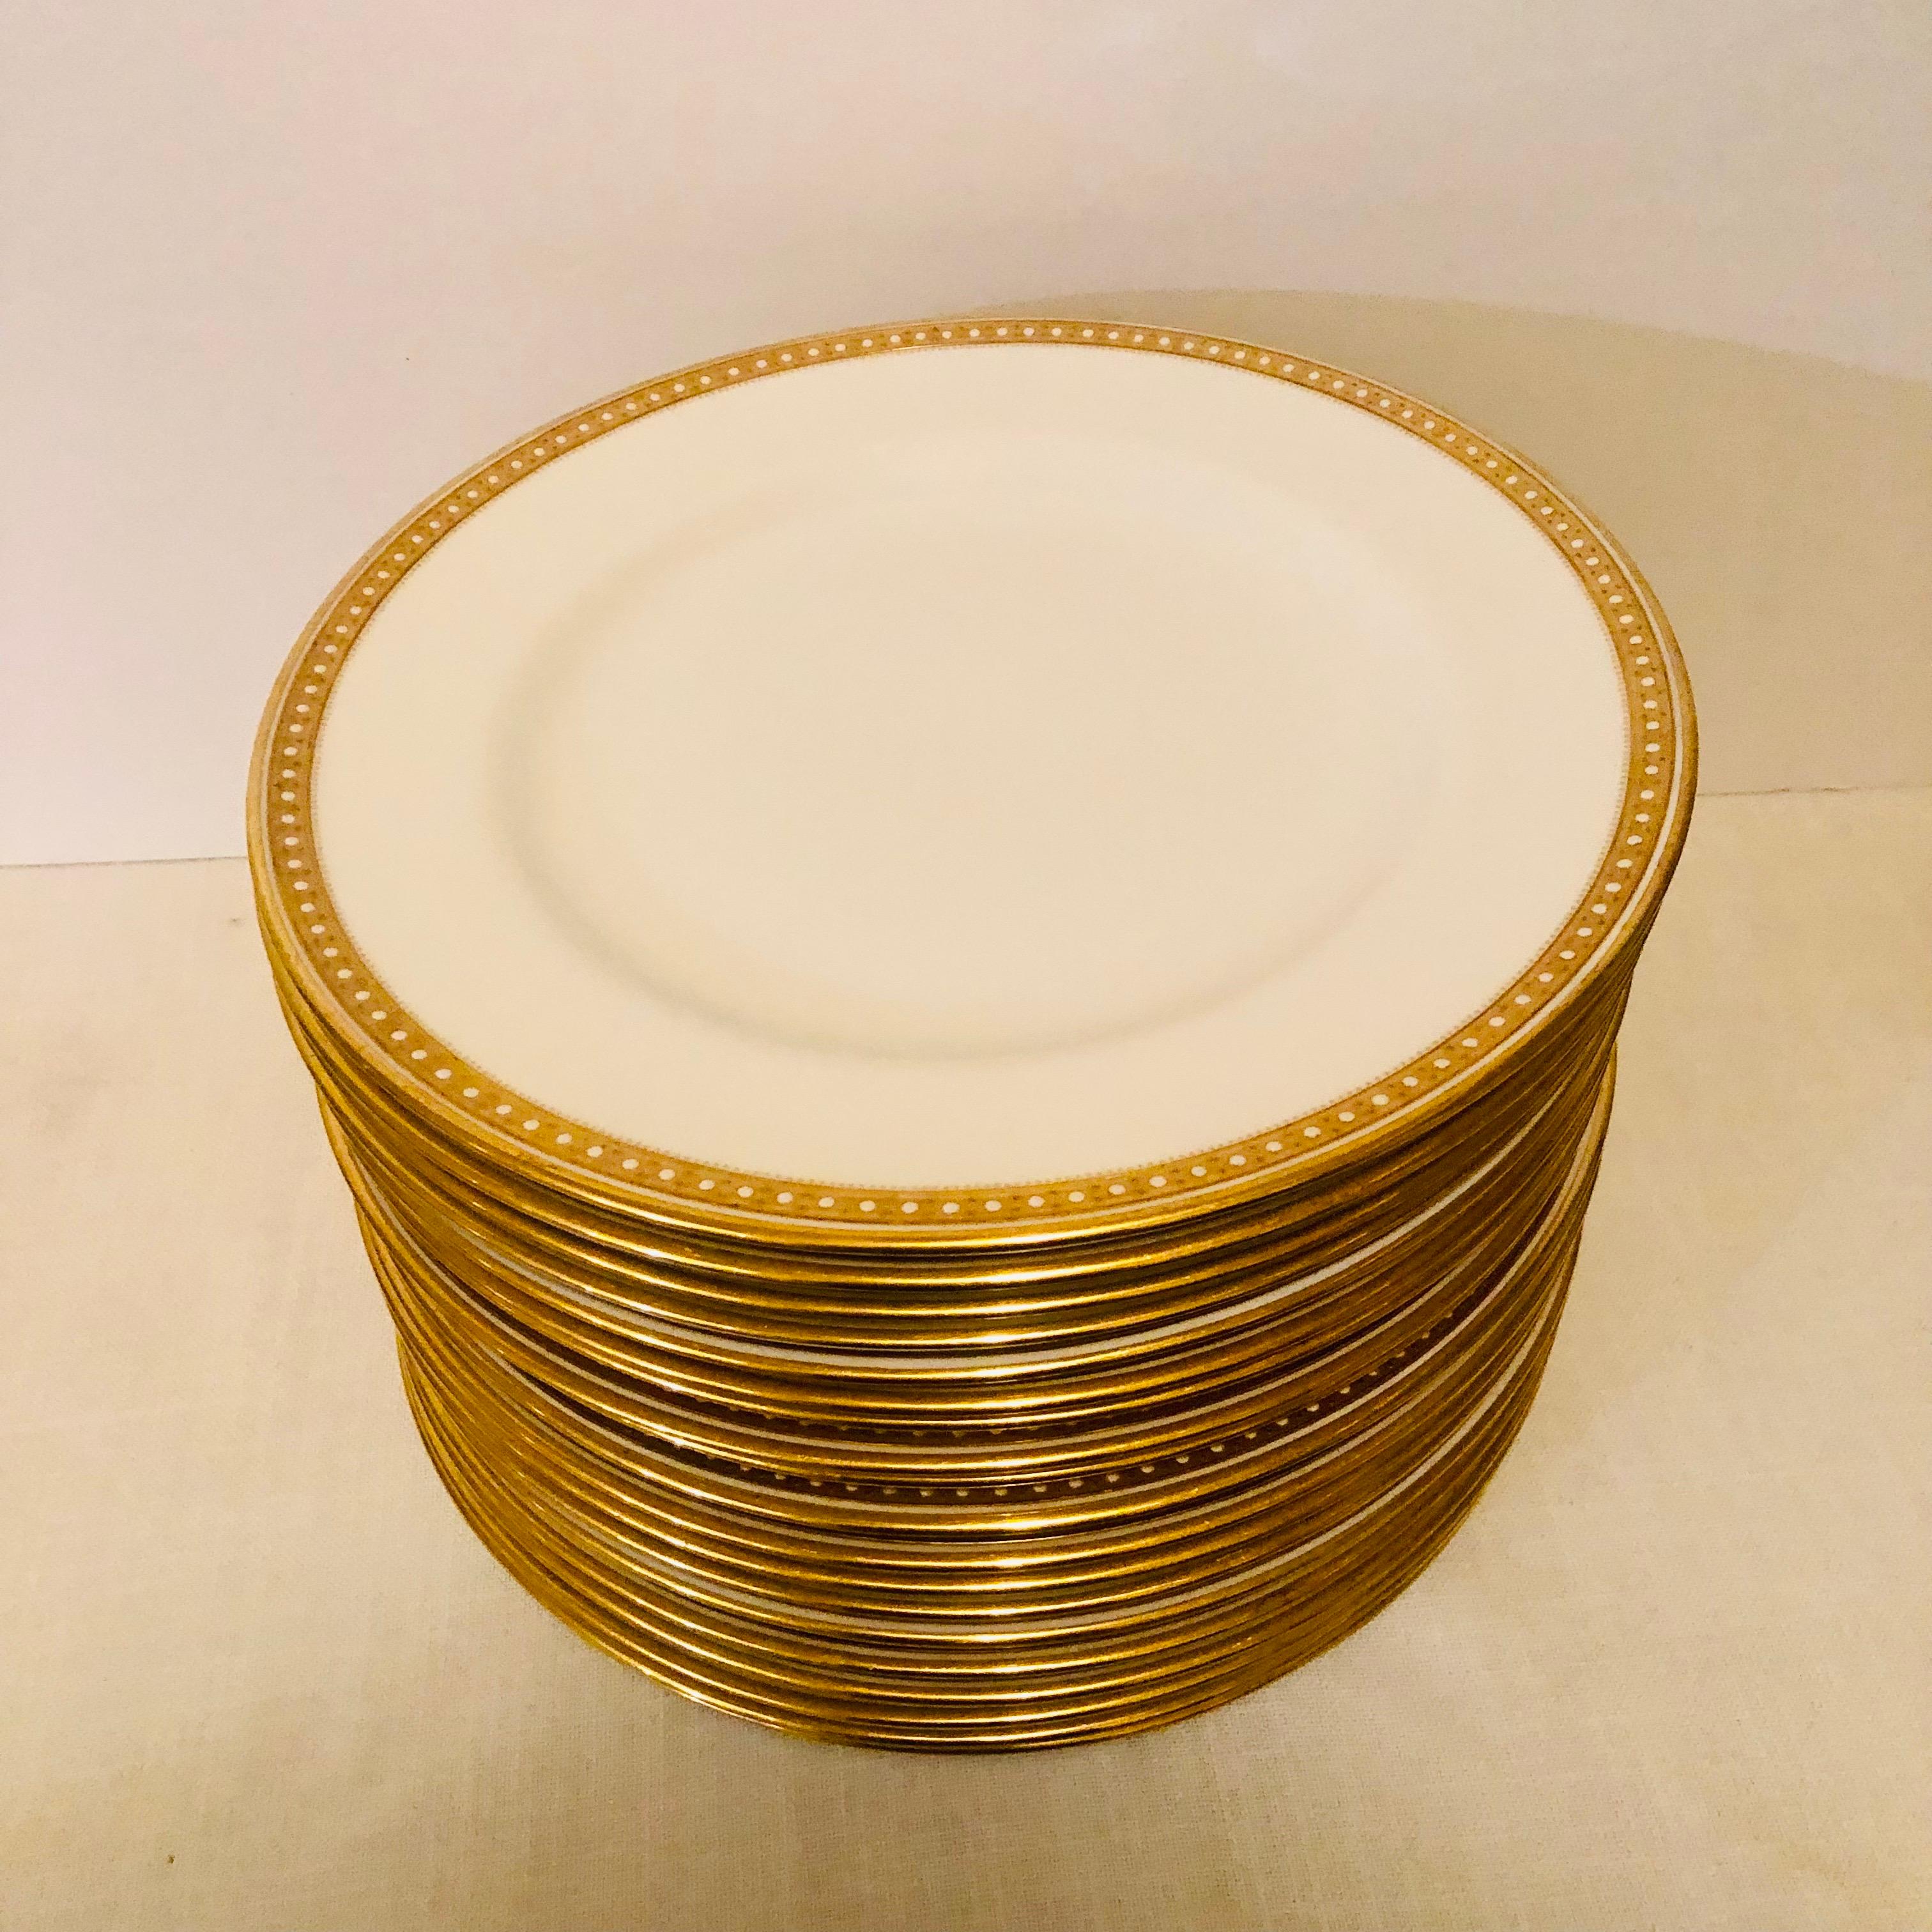 I am offering you this exquisite set of thirteen Copeland Spode dinner plates which have a gold border and white enamel jeweling on a white porcelain body. They definitely look like simple elegance, and they would look beautiful with any dinnerware